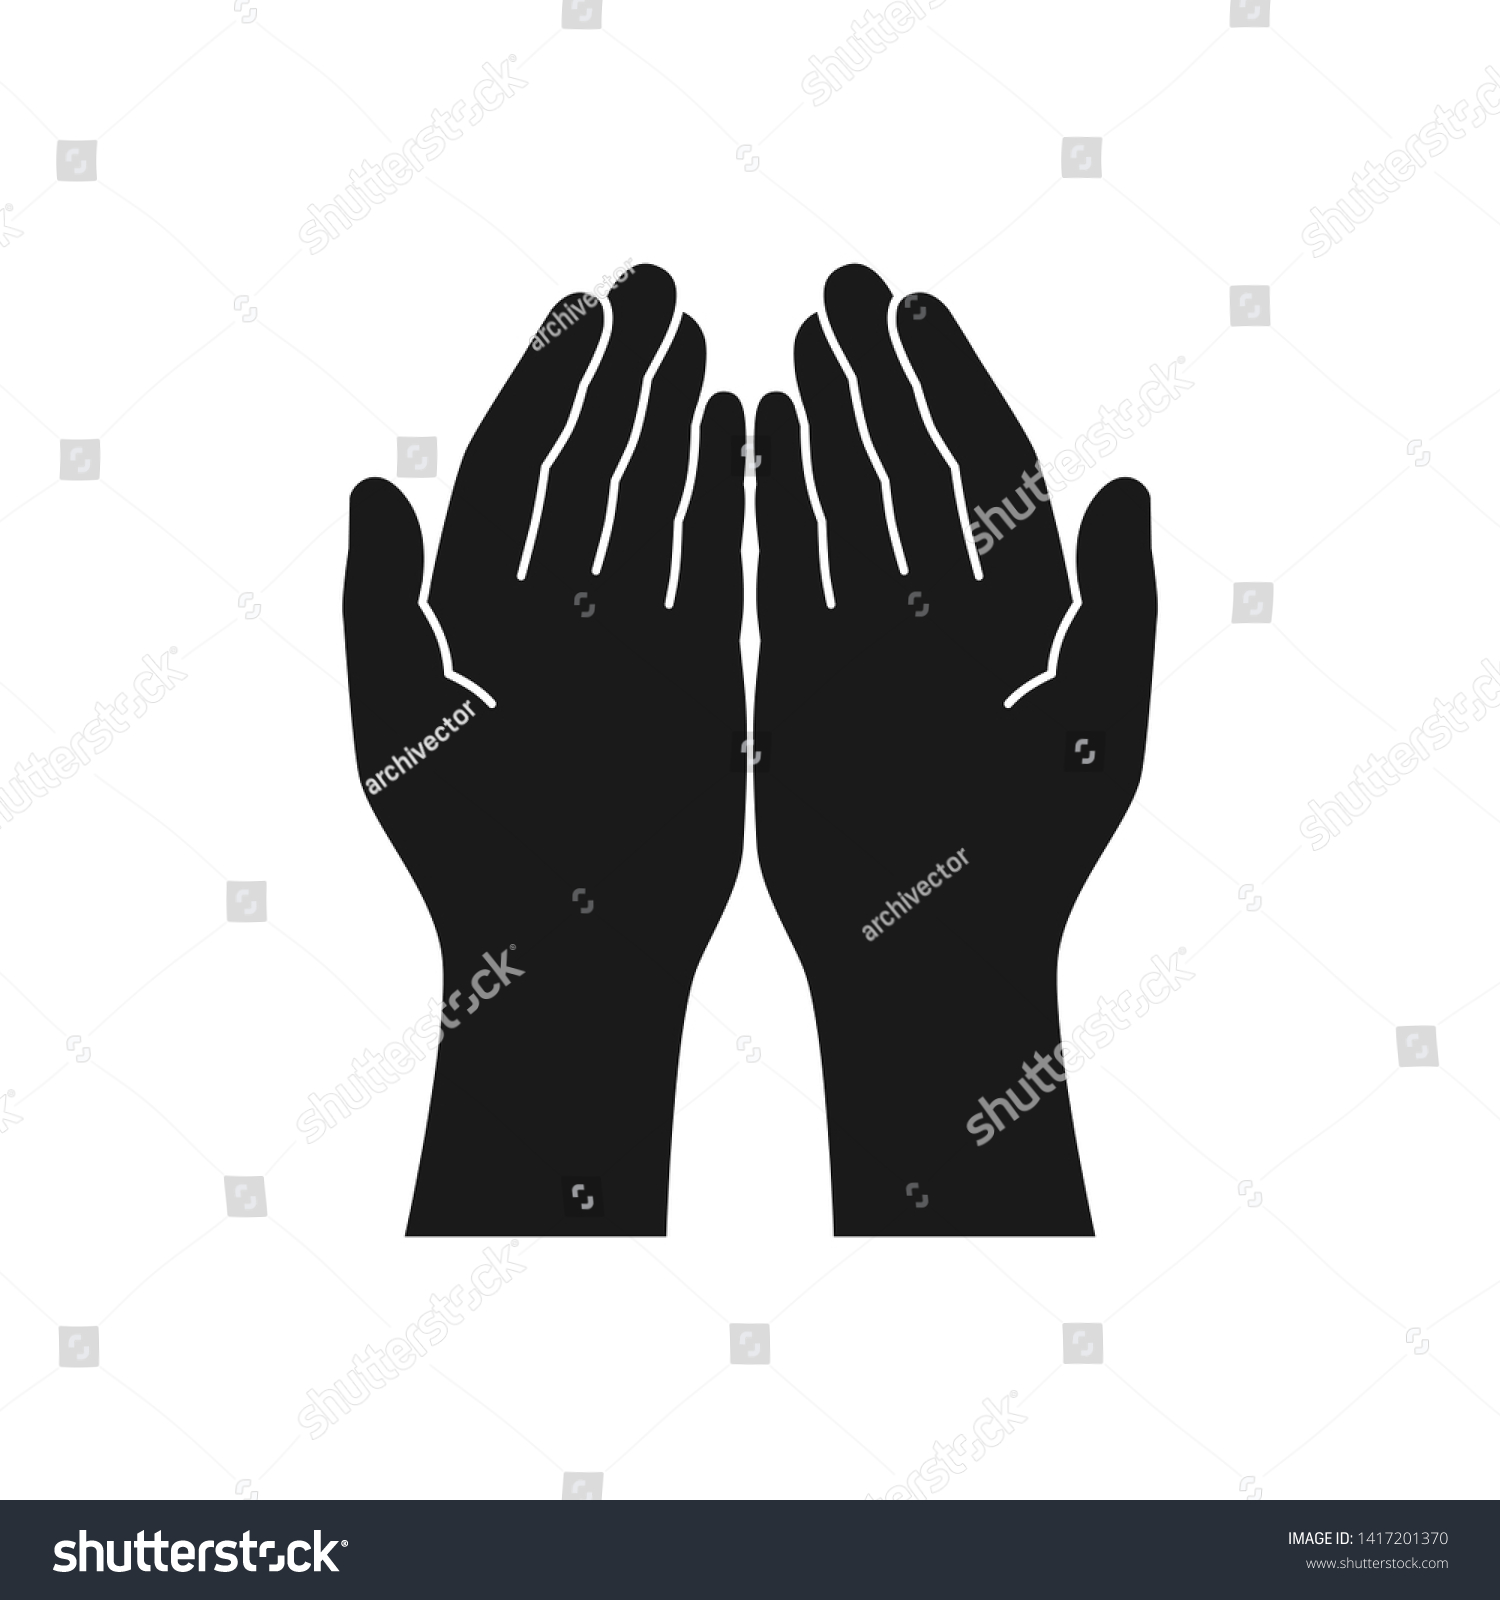 141,491 Cupped hands graphic Images, Stock Photos & Vectors | Shutterstock